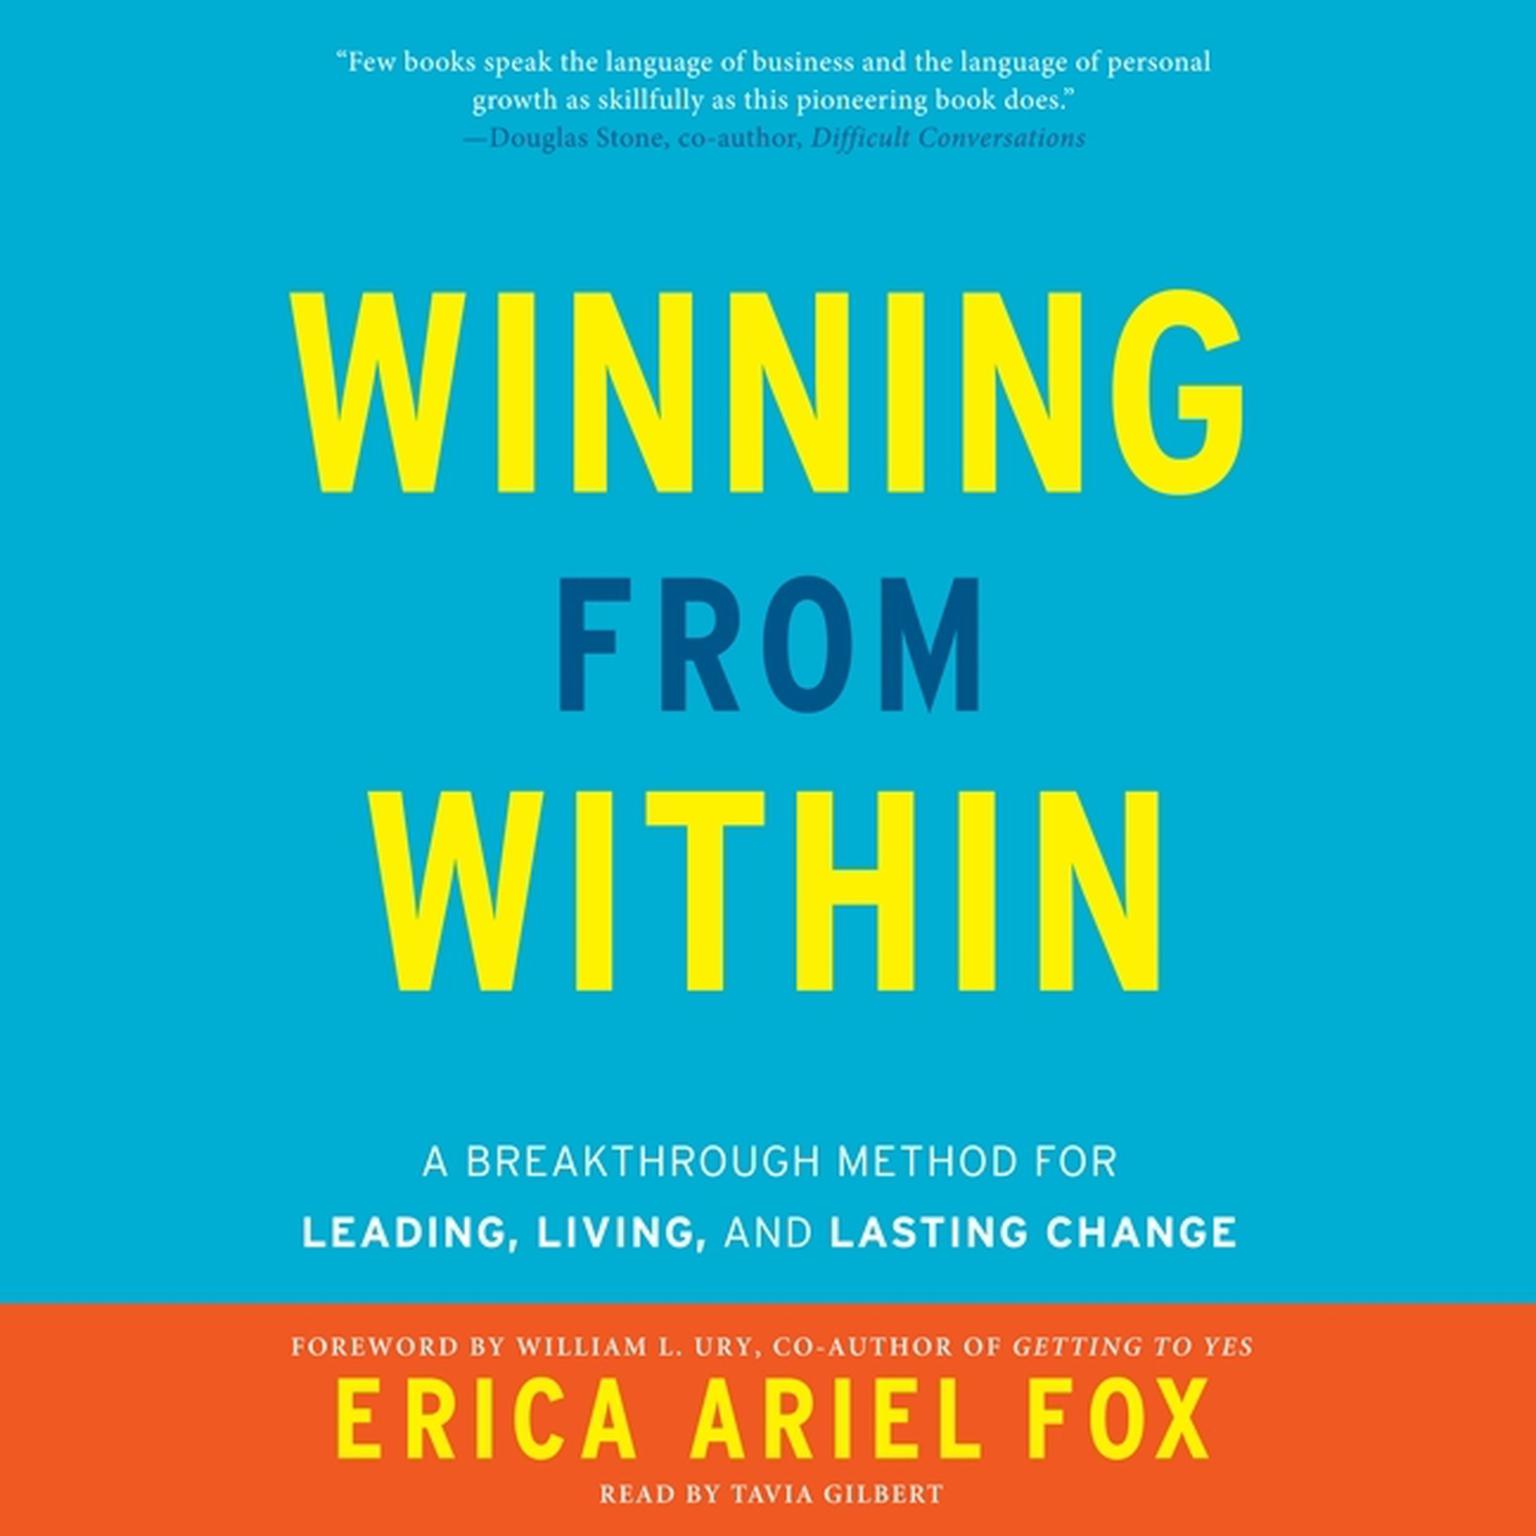 Winning from Within: A Breakthrough Method for Leading, Living, and Lasting Change Audiobook, by Erica Ariel Fox